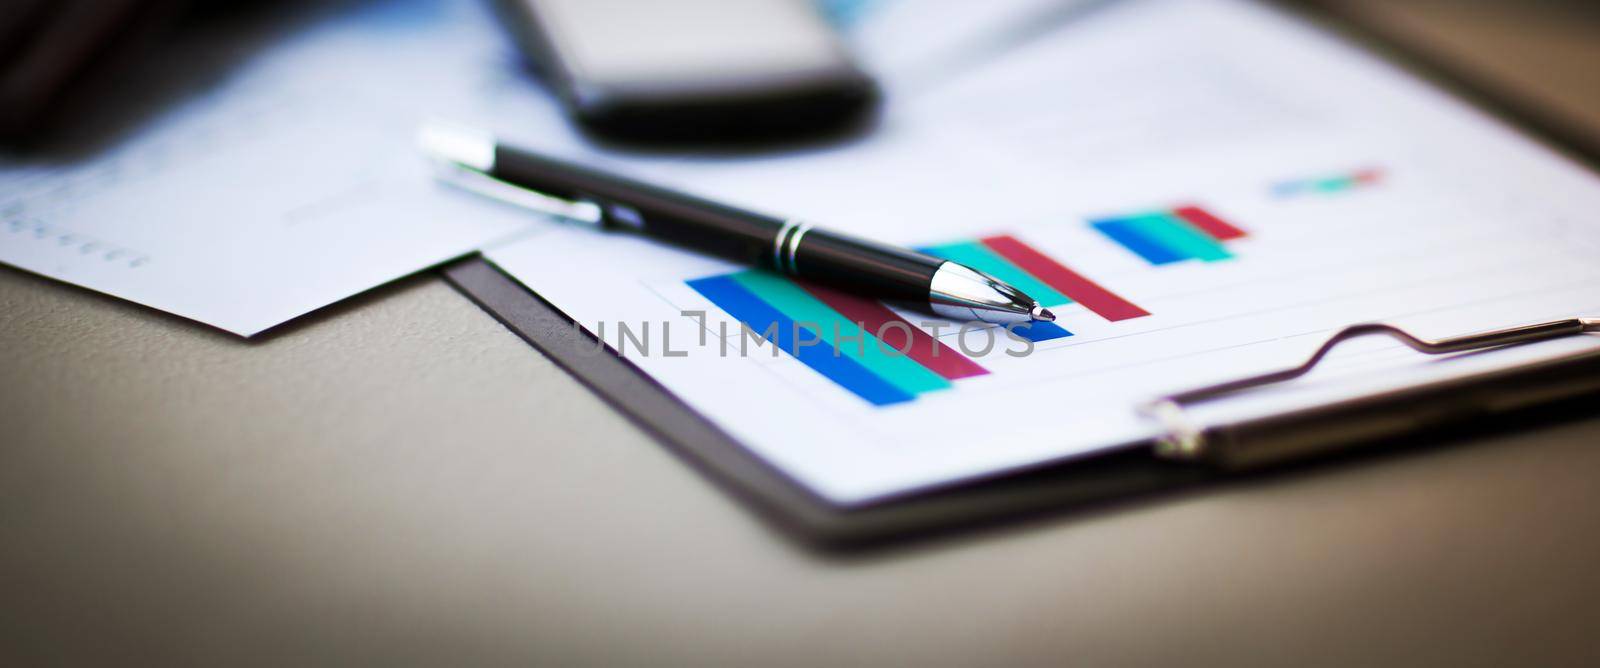 financial charts and graphs on the table by SmartPhotoLab